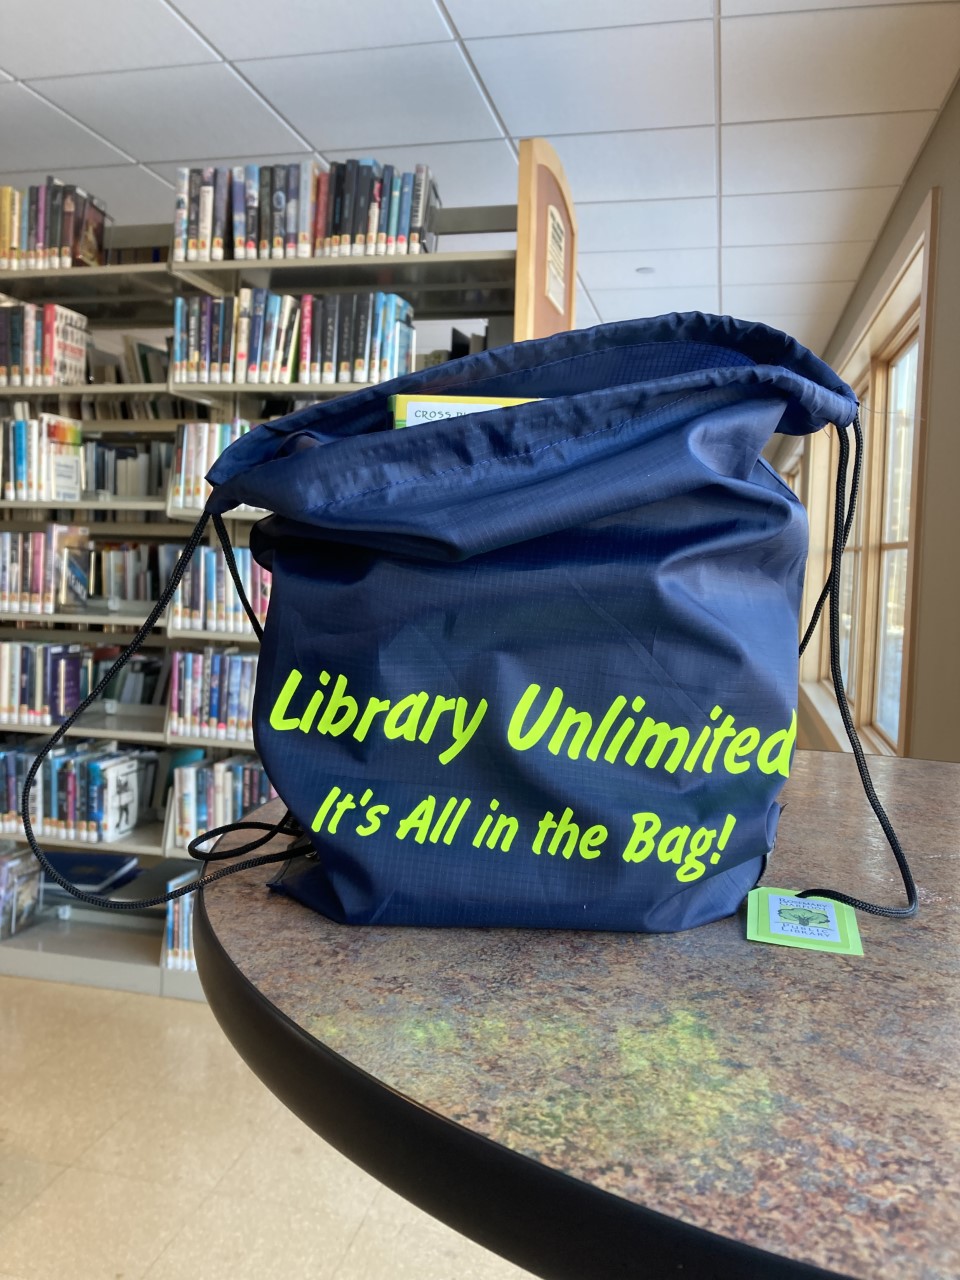 Library Unlimited branded bag full of books